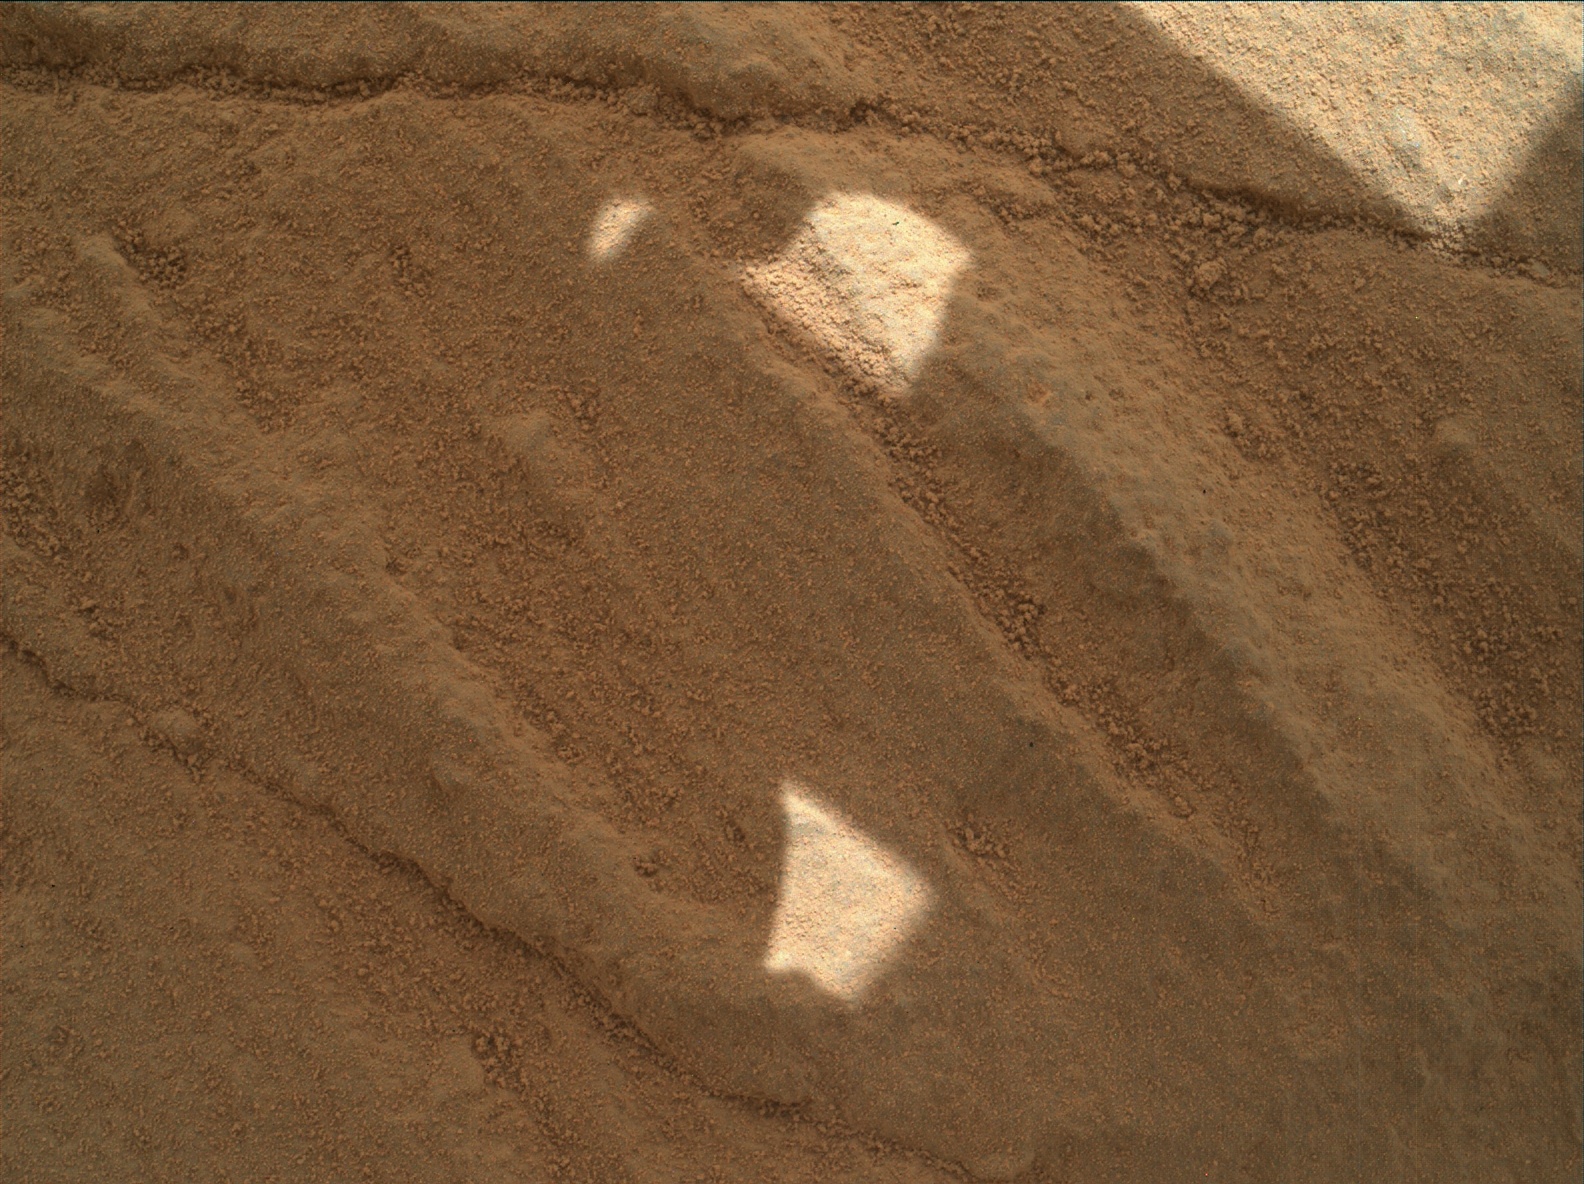 Nasa's Mars rover Curiosity acquired this image using its Mars Hand Lens Imager (MAHLI) on Sol 742